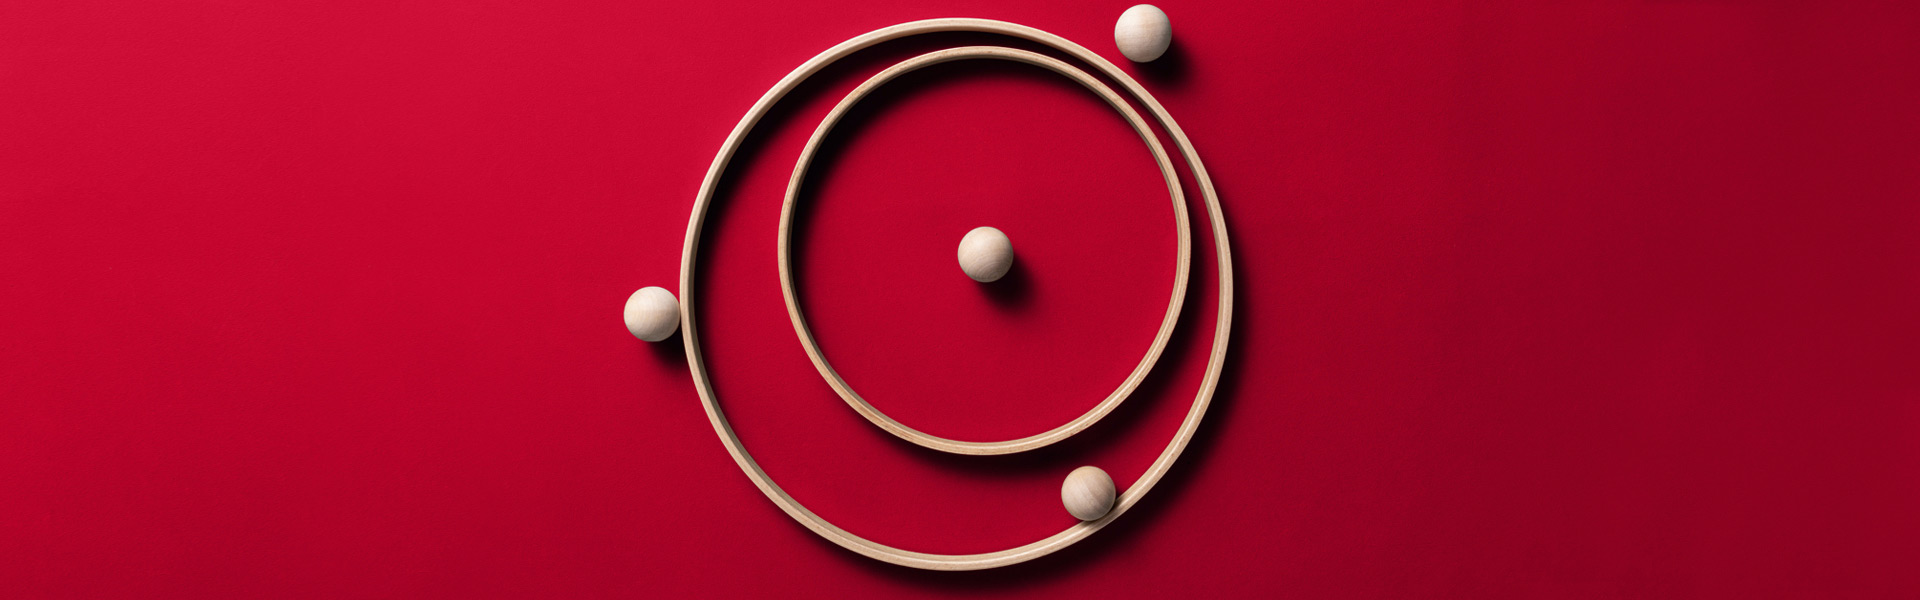 2 circles and with 4 balls located in various locations on red background